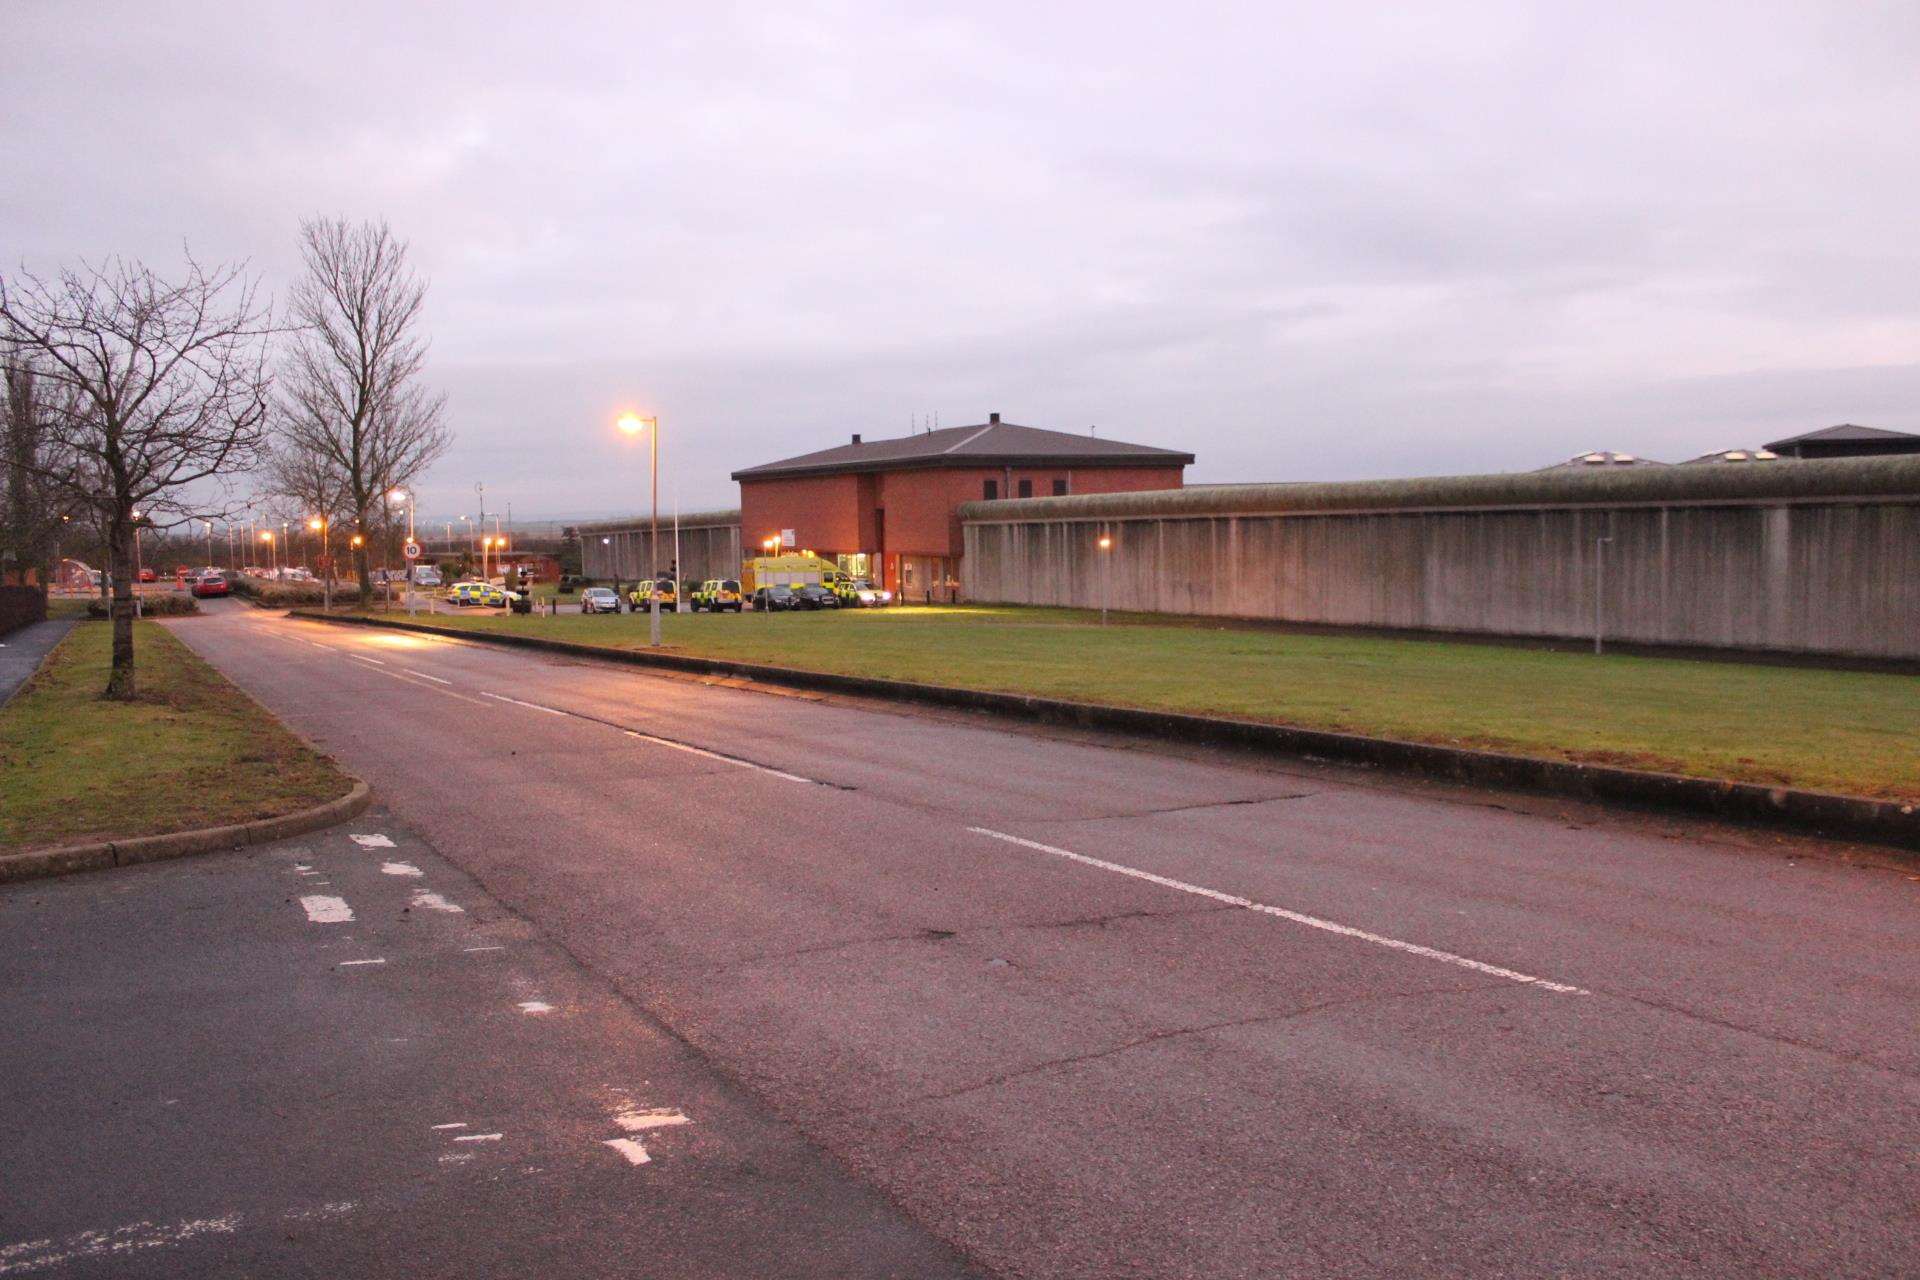 Swaleside prison on the Isle of Sheppey (5861914)